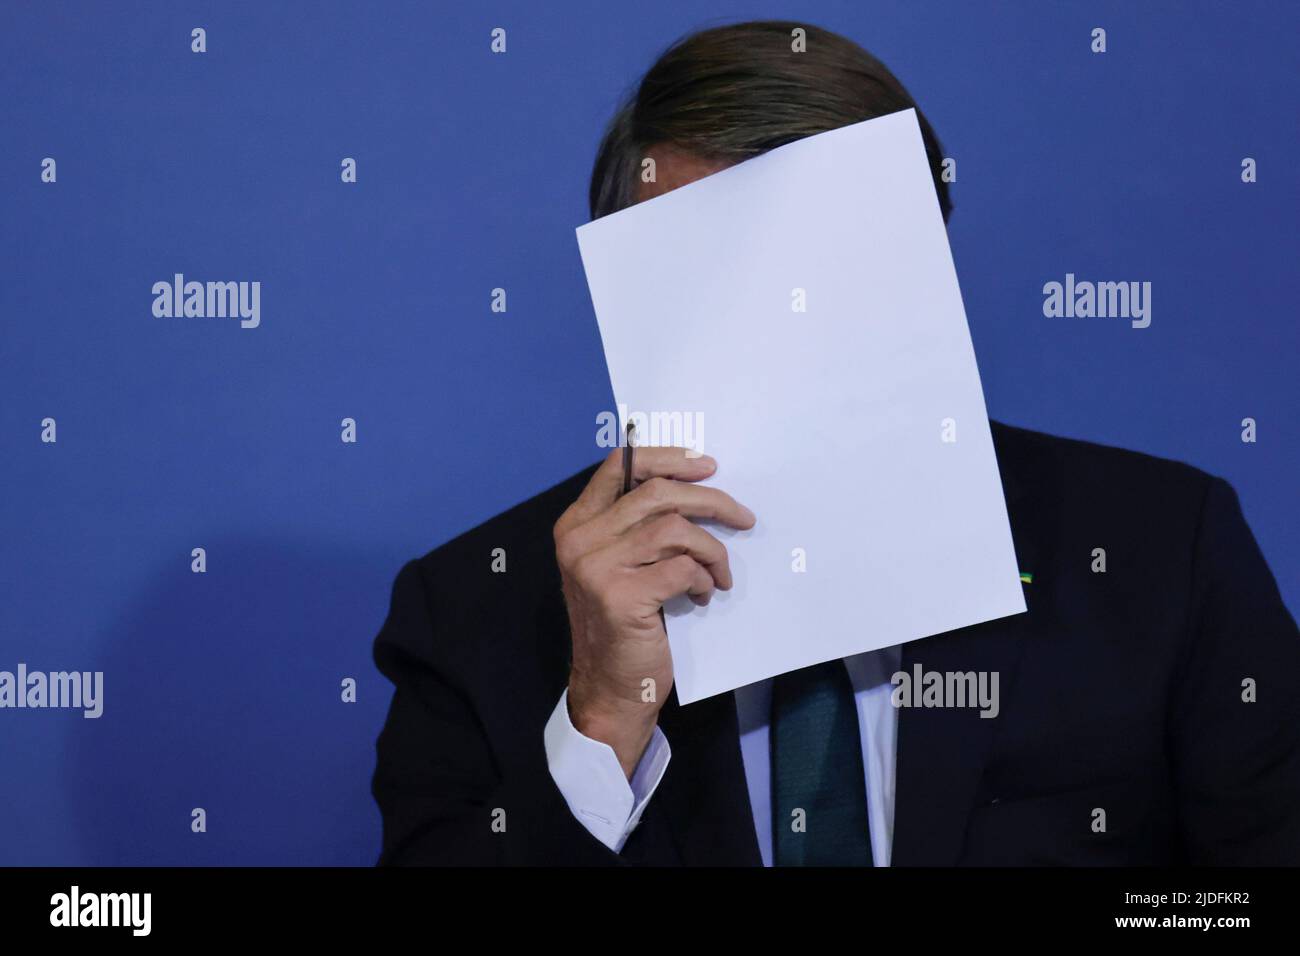 Brazil's President Jair Bolsonaro puts a sheet of paper in front his face during a ceremony about the National Policy for Education at the Planalto Palace in Brasilia, Brazil June 20, 2022. REUTERS/Ueslei Marcelino Stock Photo